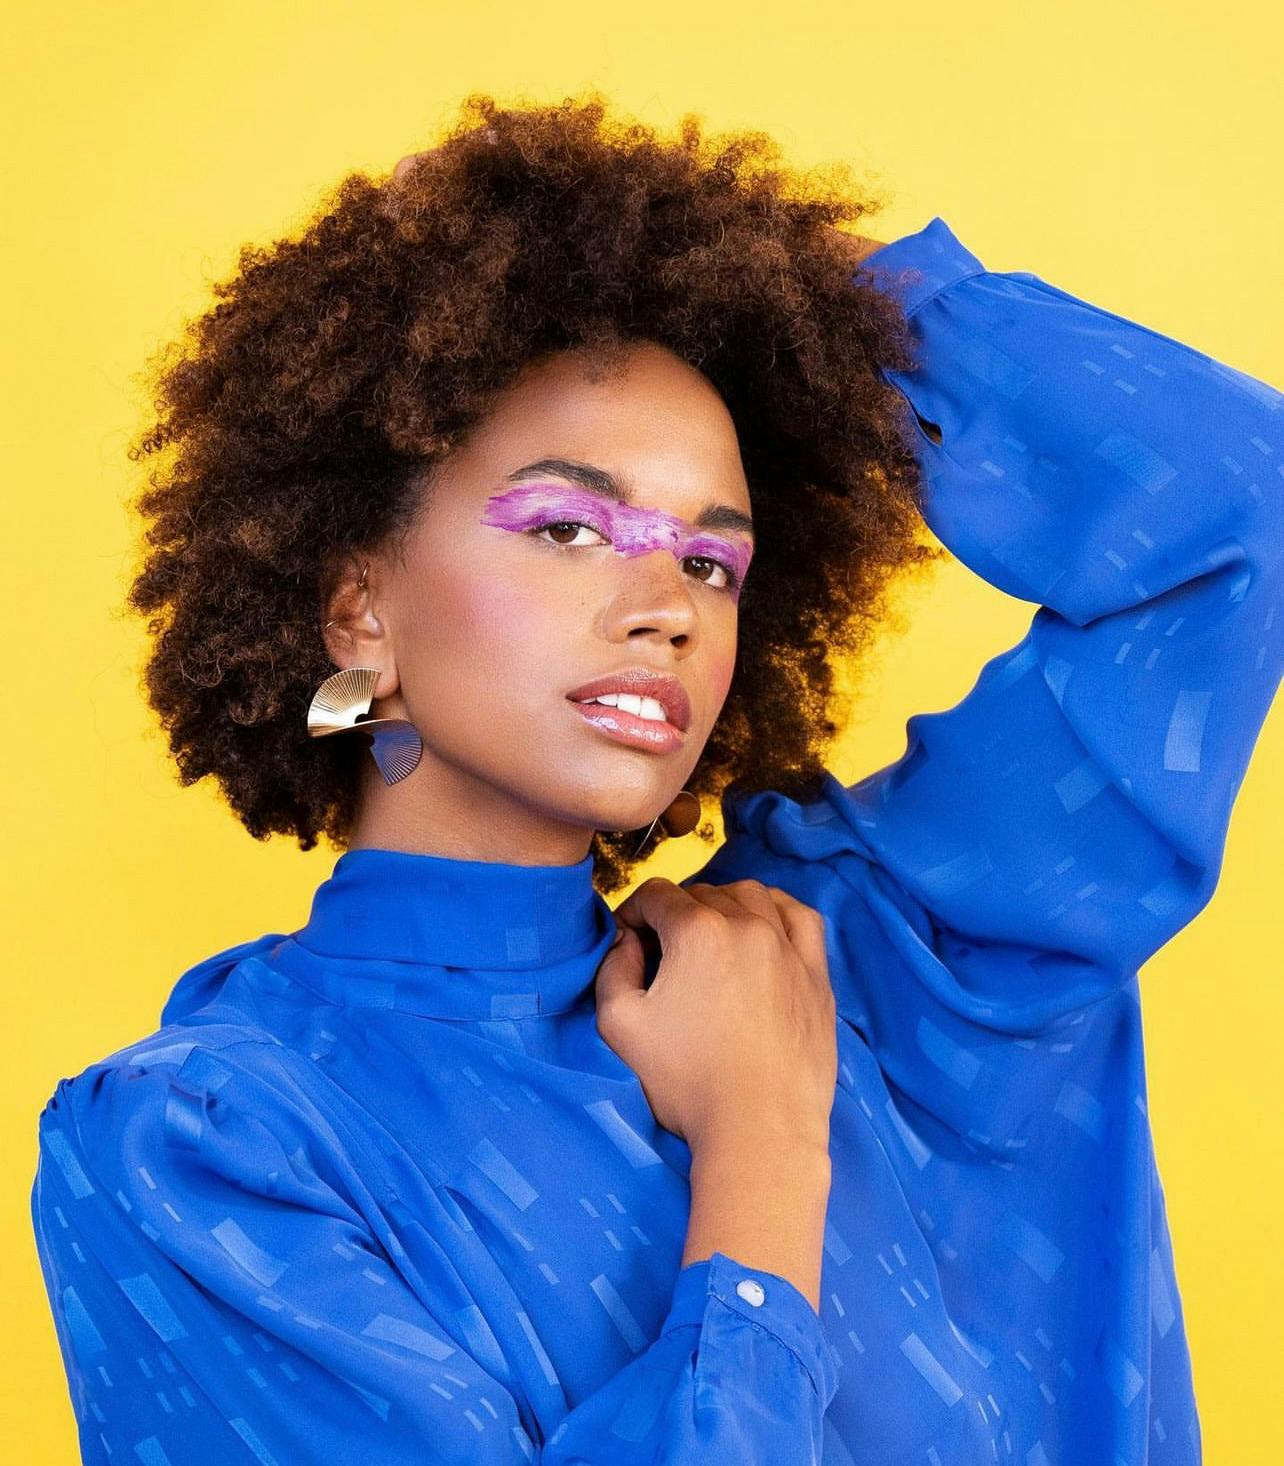 Black woman in blue shirt with futuristic eye makeup against a yellow background